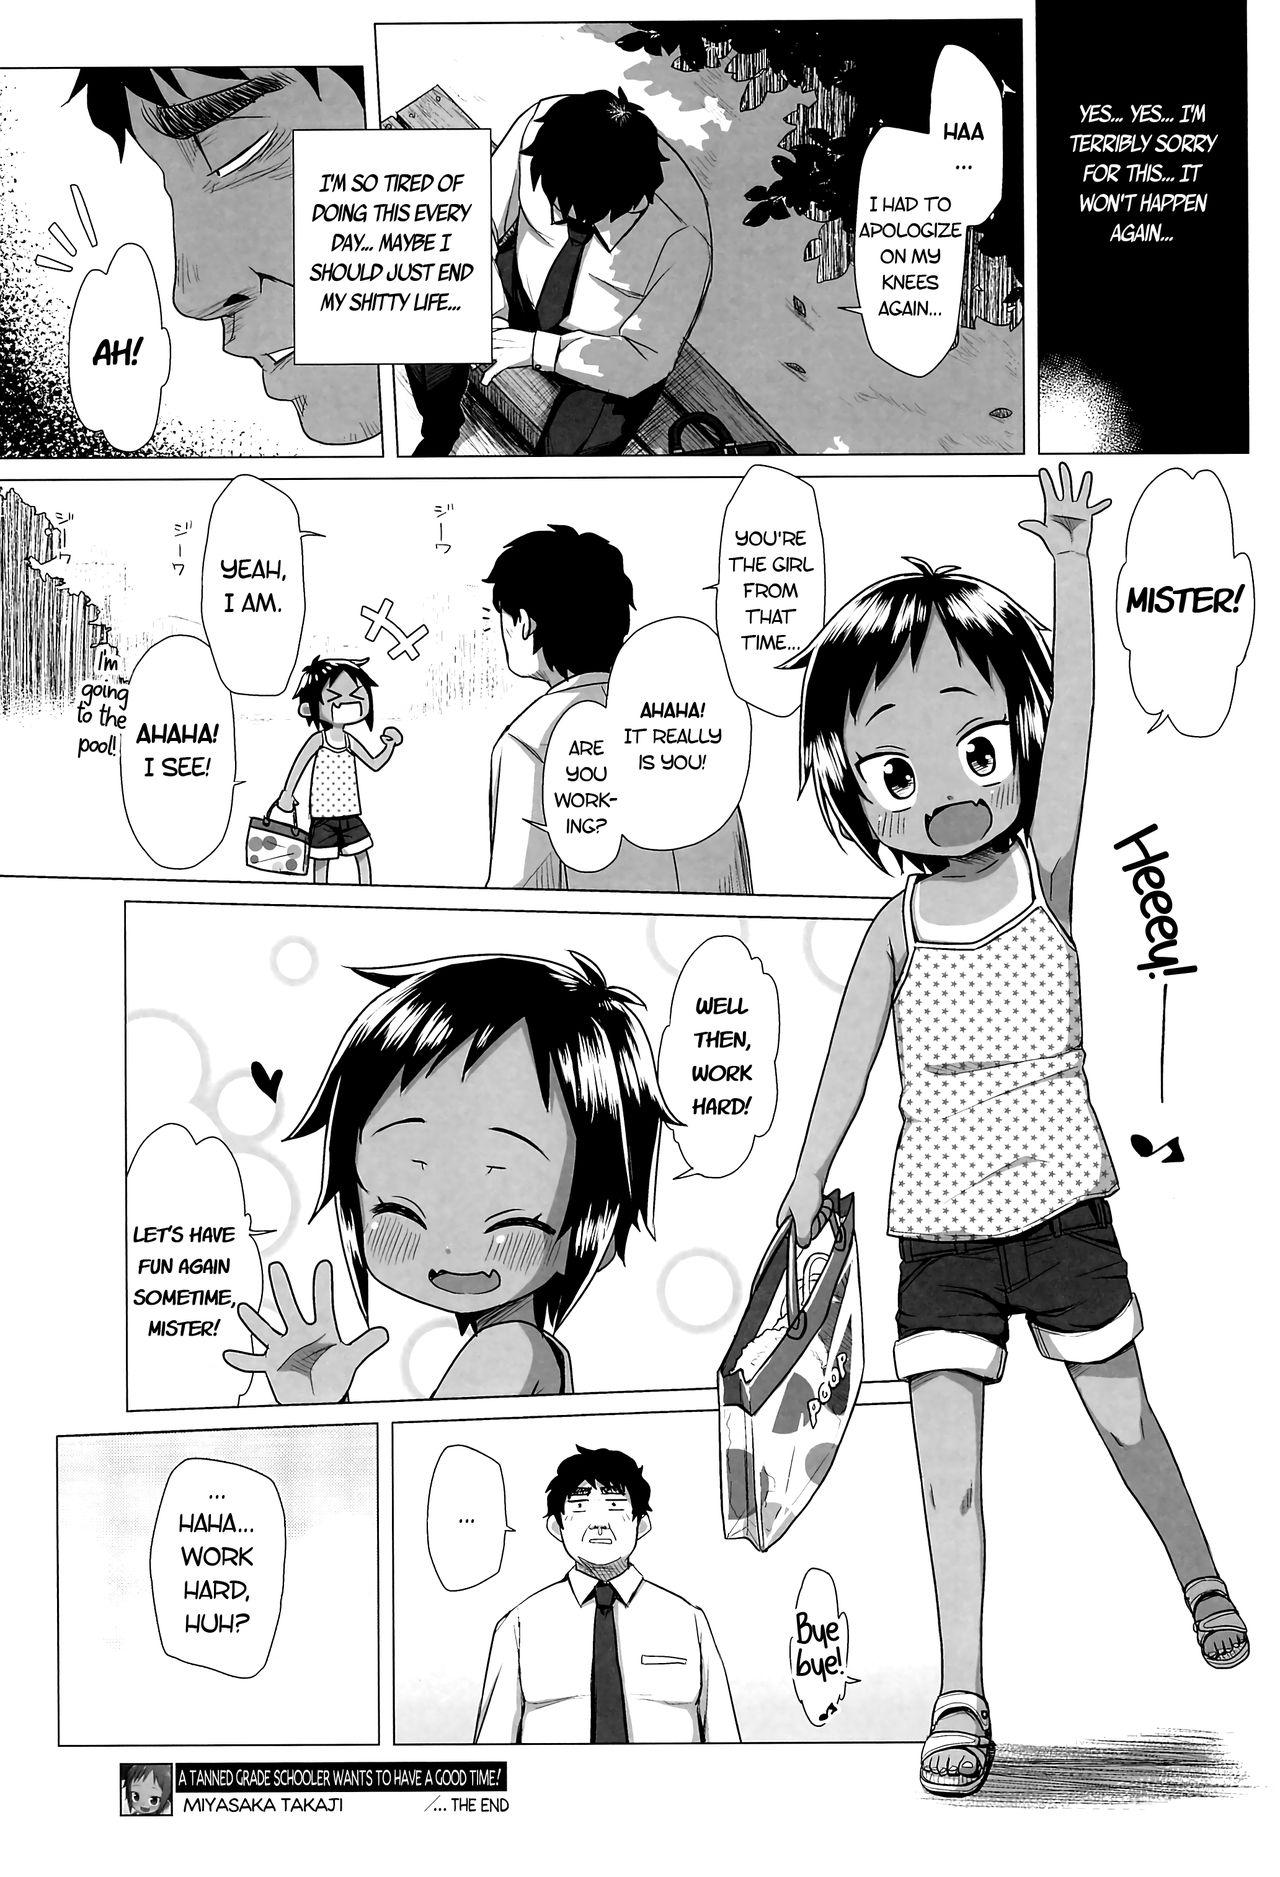 Hiyake JS wa Asobitai! | A tanned grade schooler wants to have a good time! 19